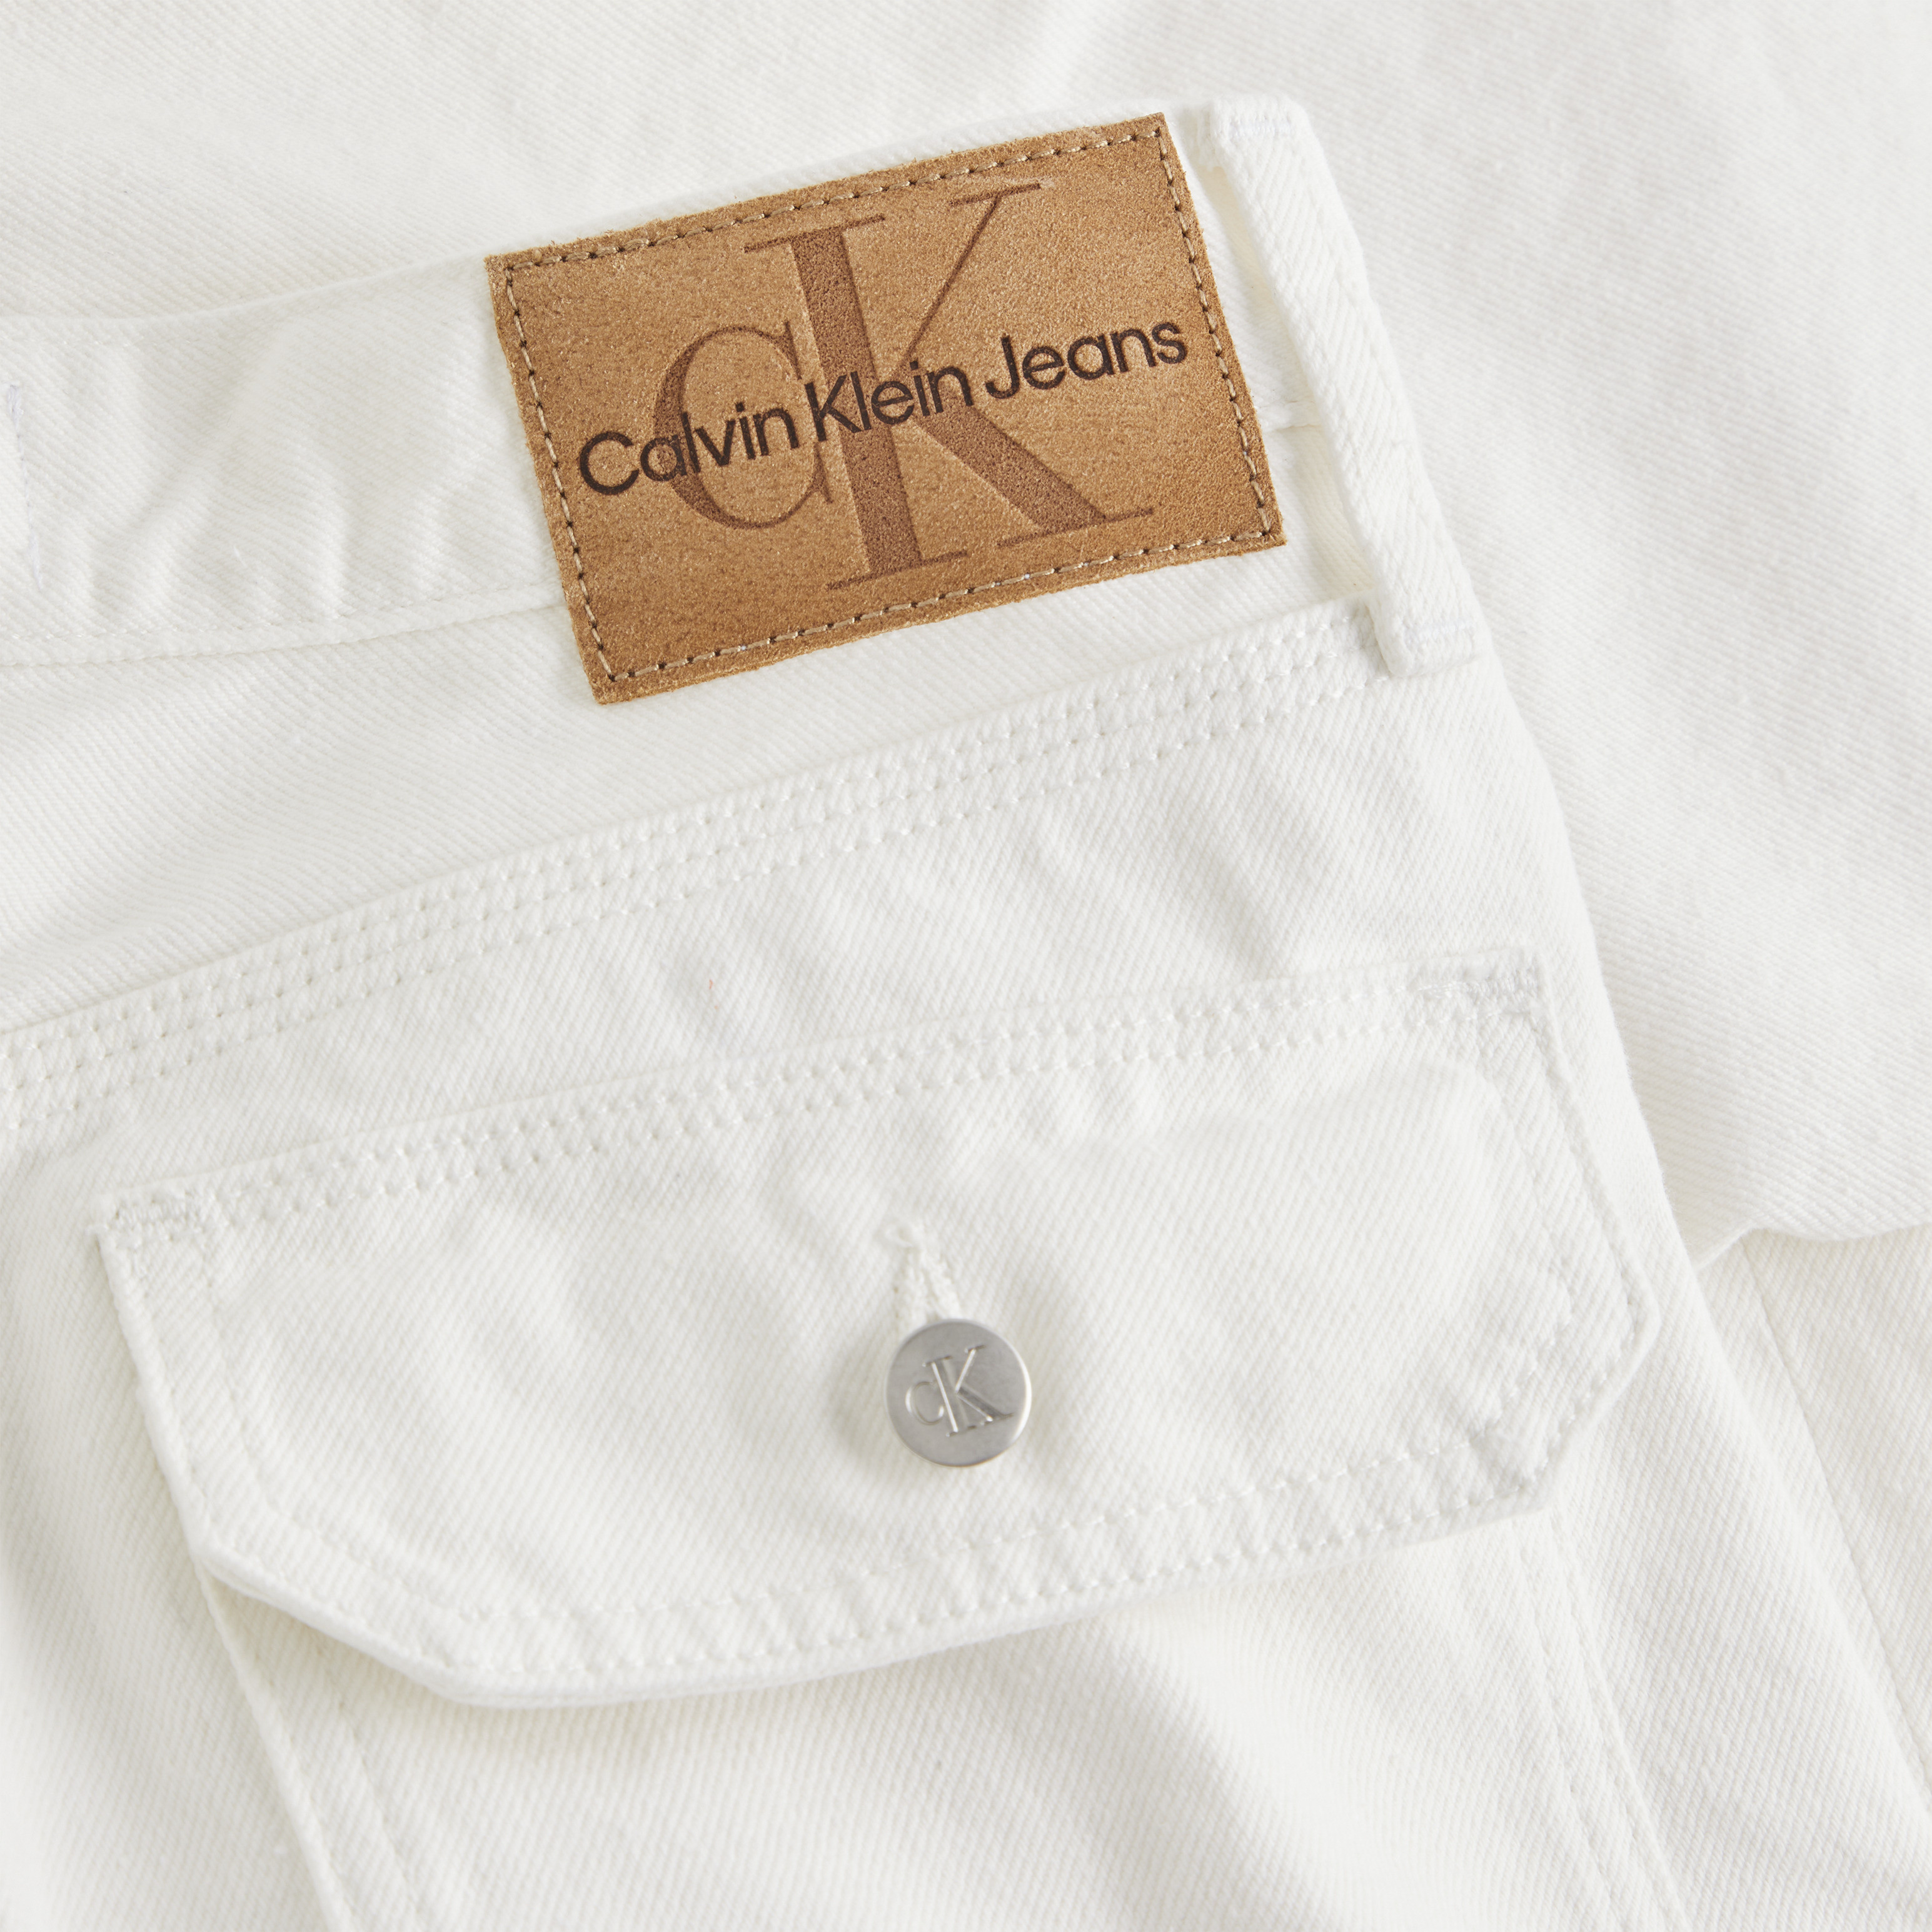 Calvin Klein Jeans - Jeans dritti in cotone, Bianco, large image number 5